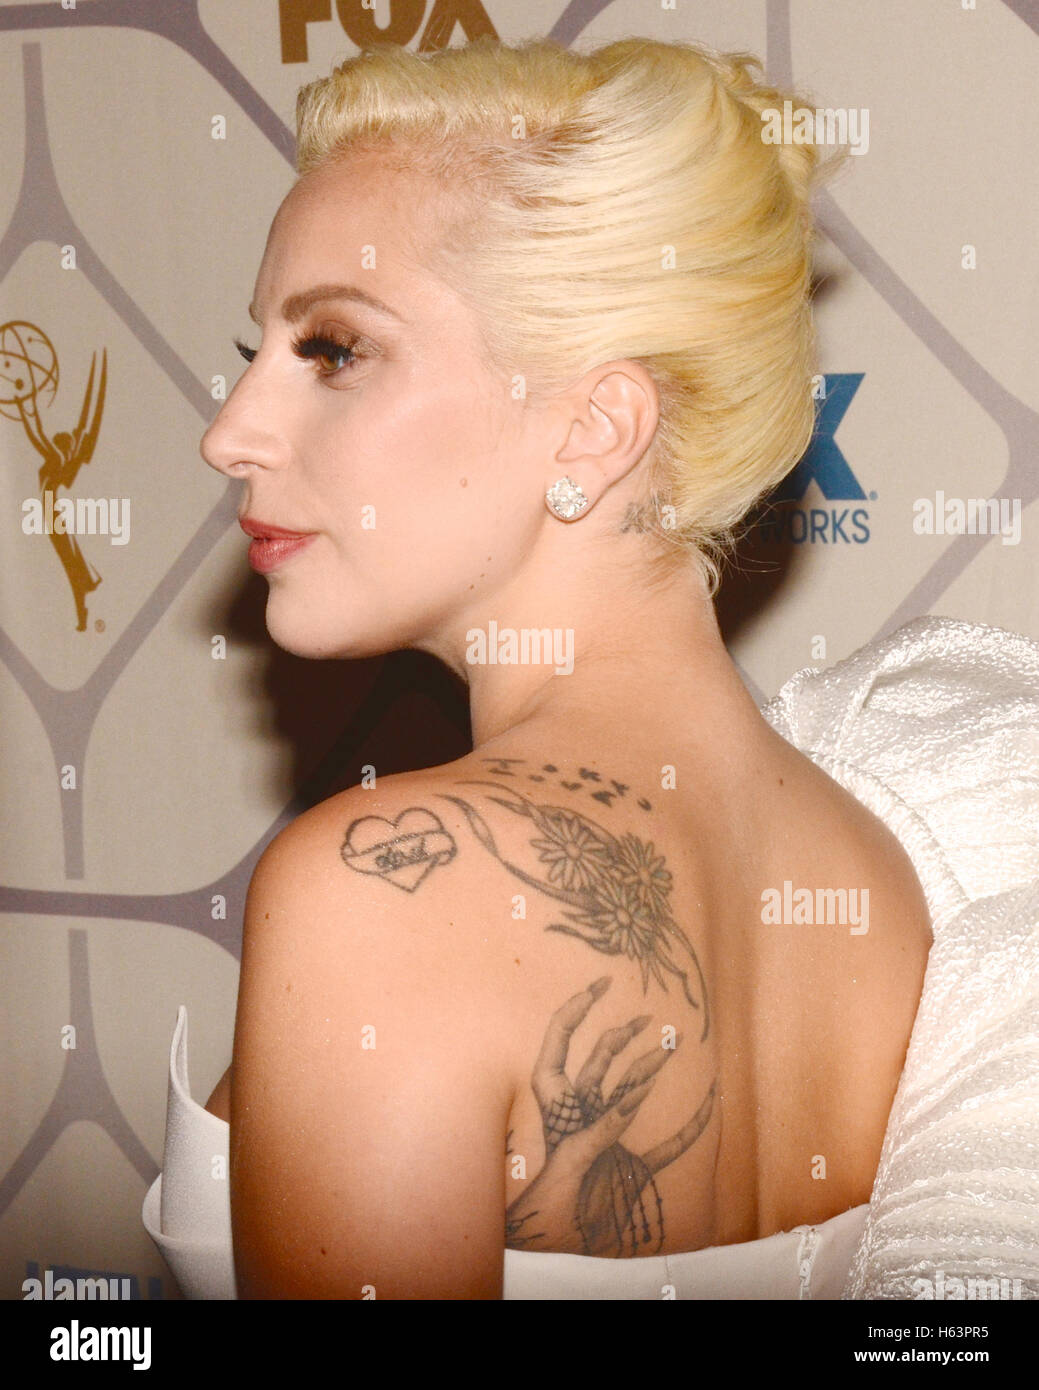 Lady Gaga aka Stefani Joanne Angelina Germanotta attends the 67th Primetime Emmy Awards Fox after party on September 20, 2015 in Los Angeles, California. Stock Photo